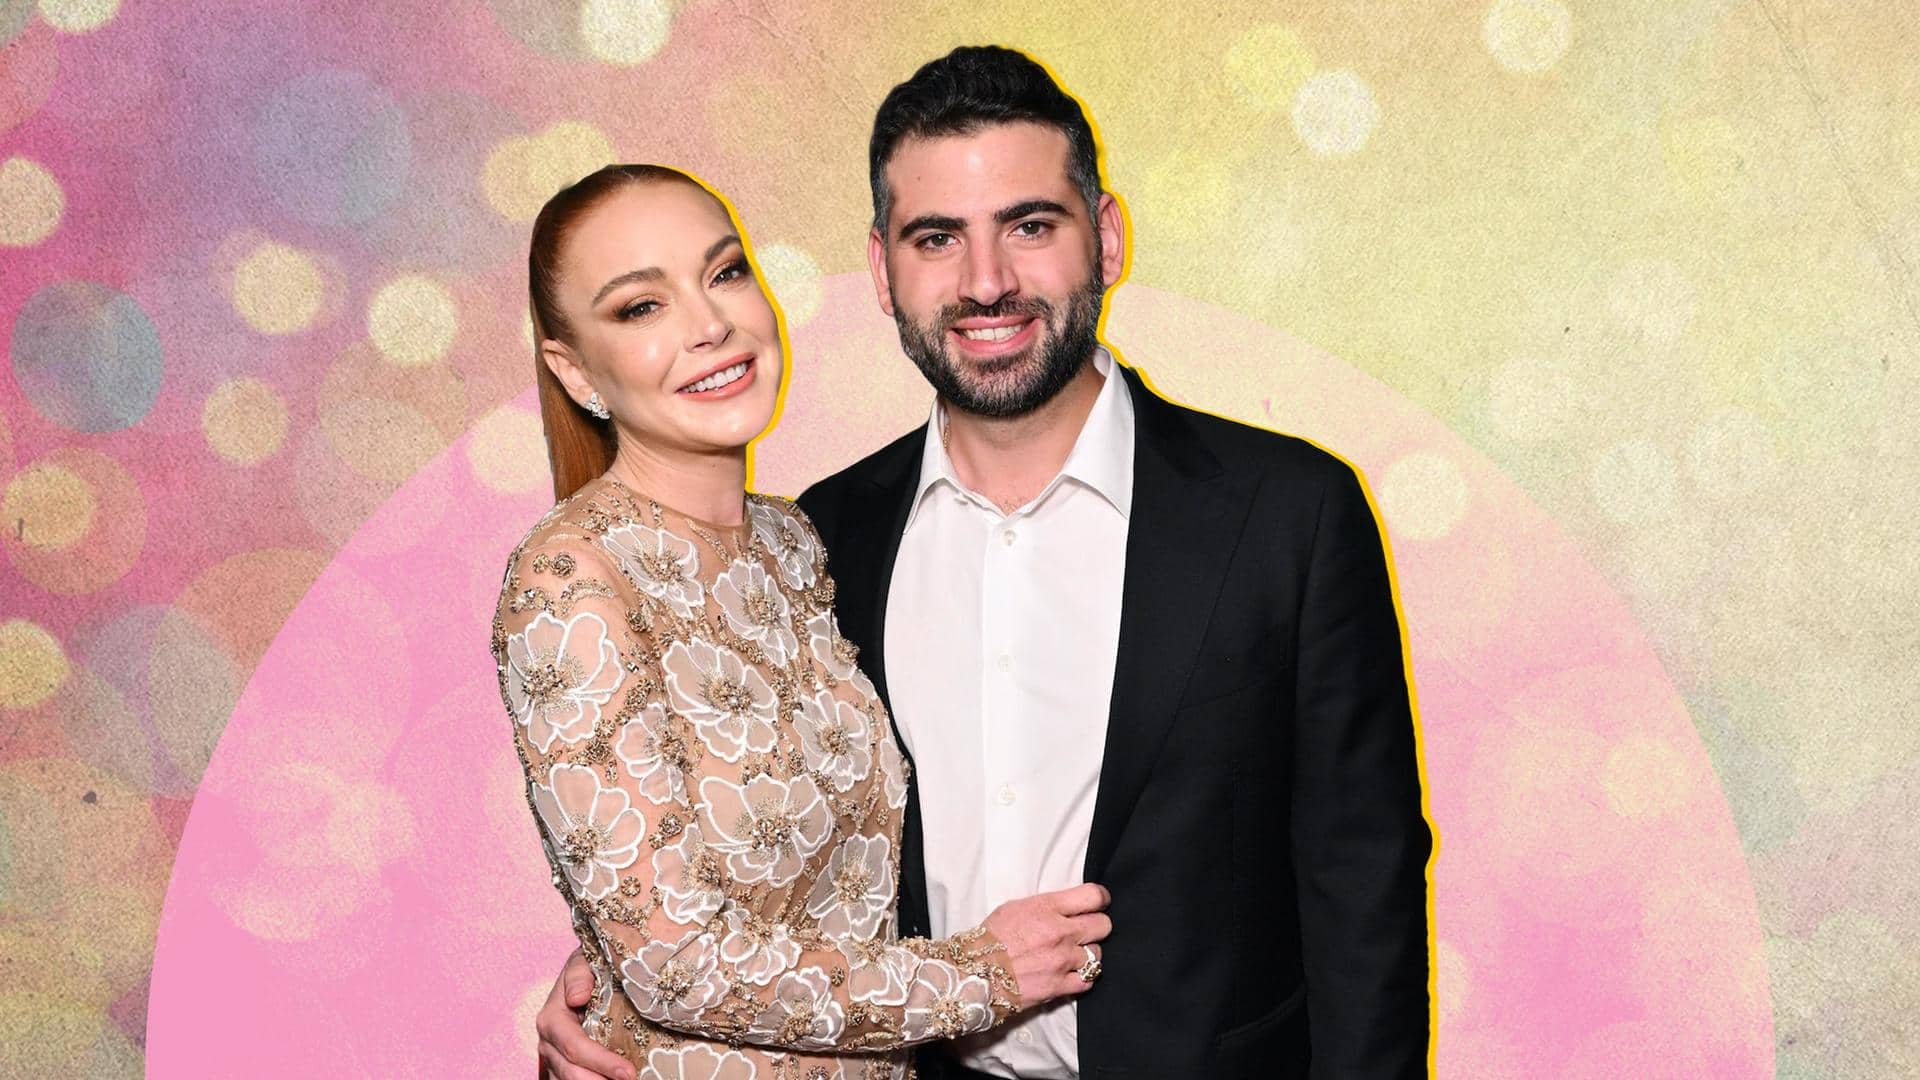 All about soon-to-be parents Lindsay Lohan, Bader Shammas's love story